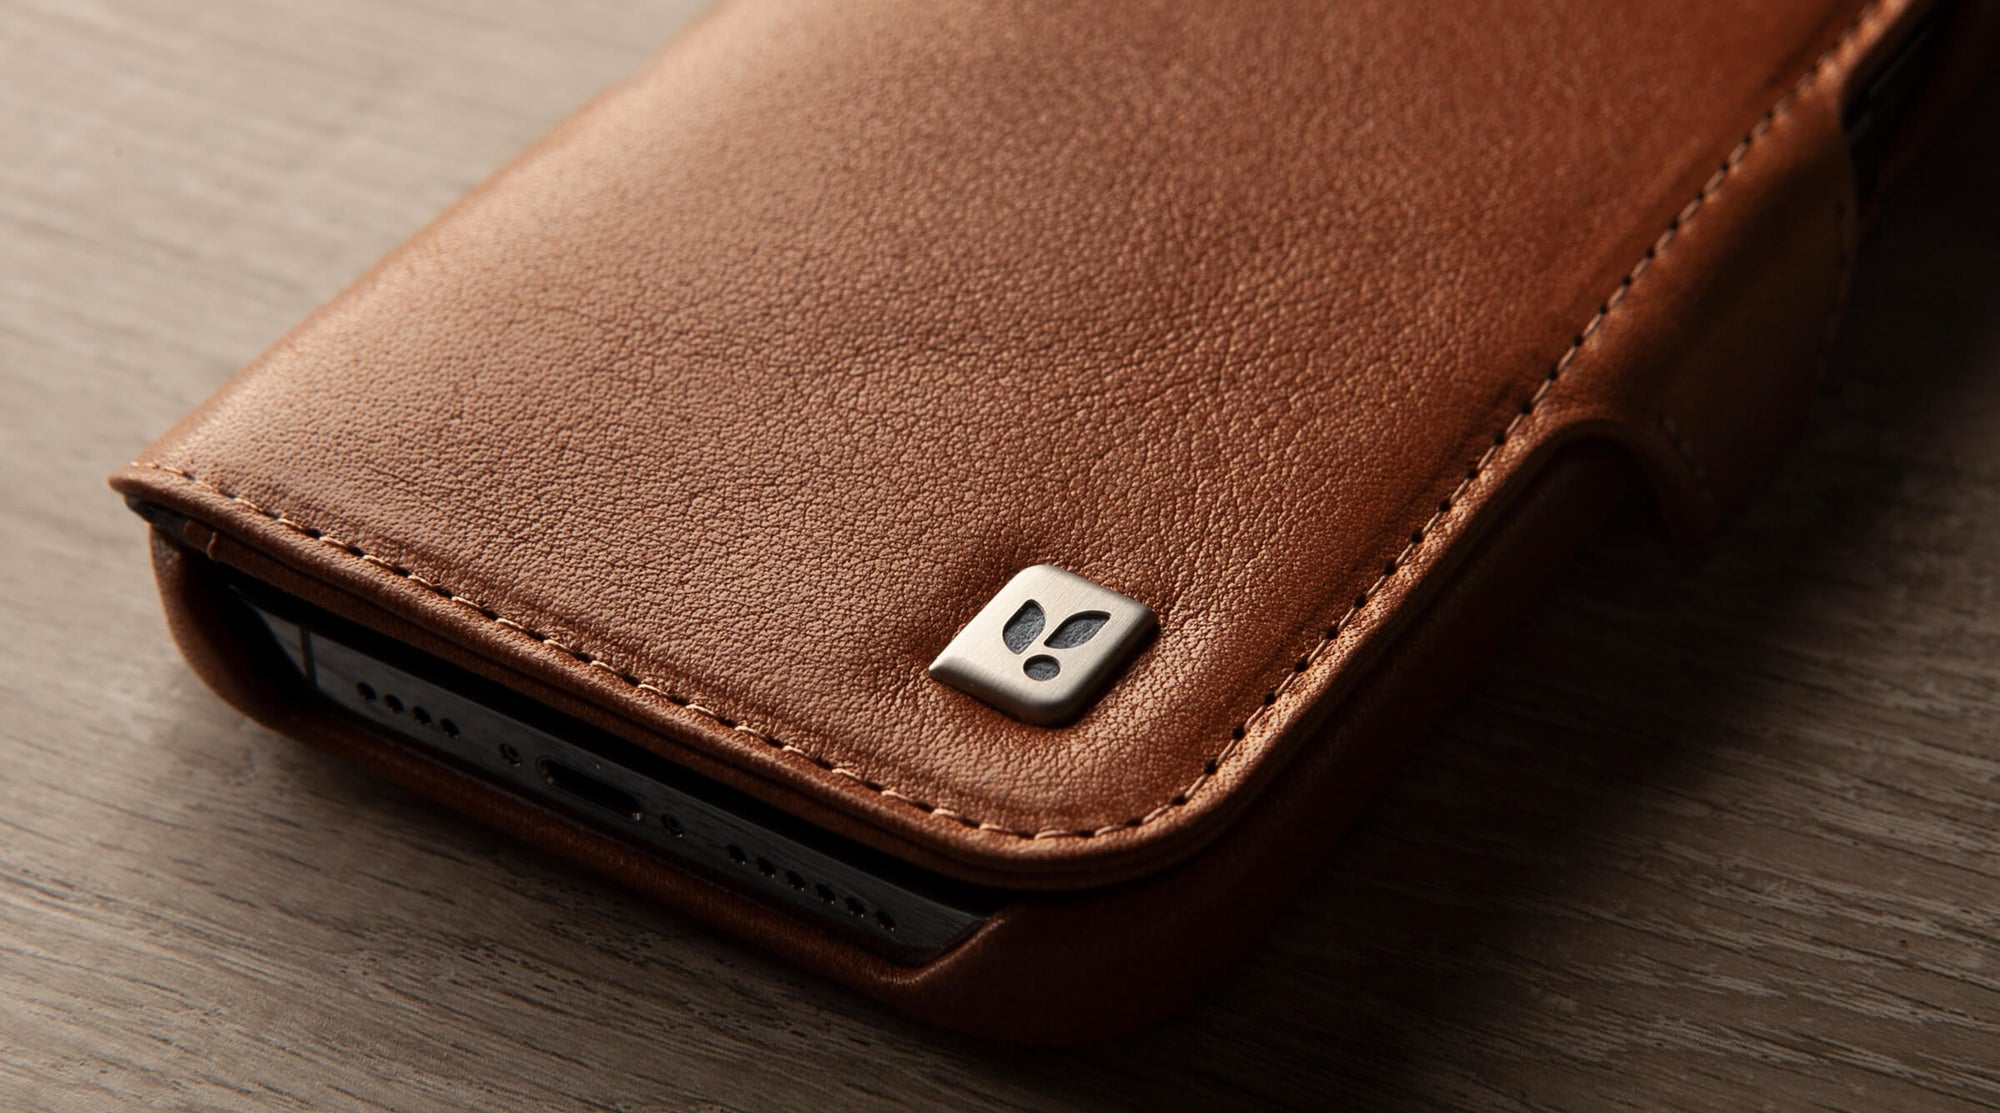 Protect Your iPhone in Style with a Leather Case